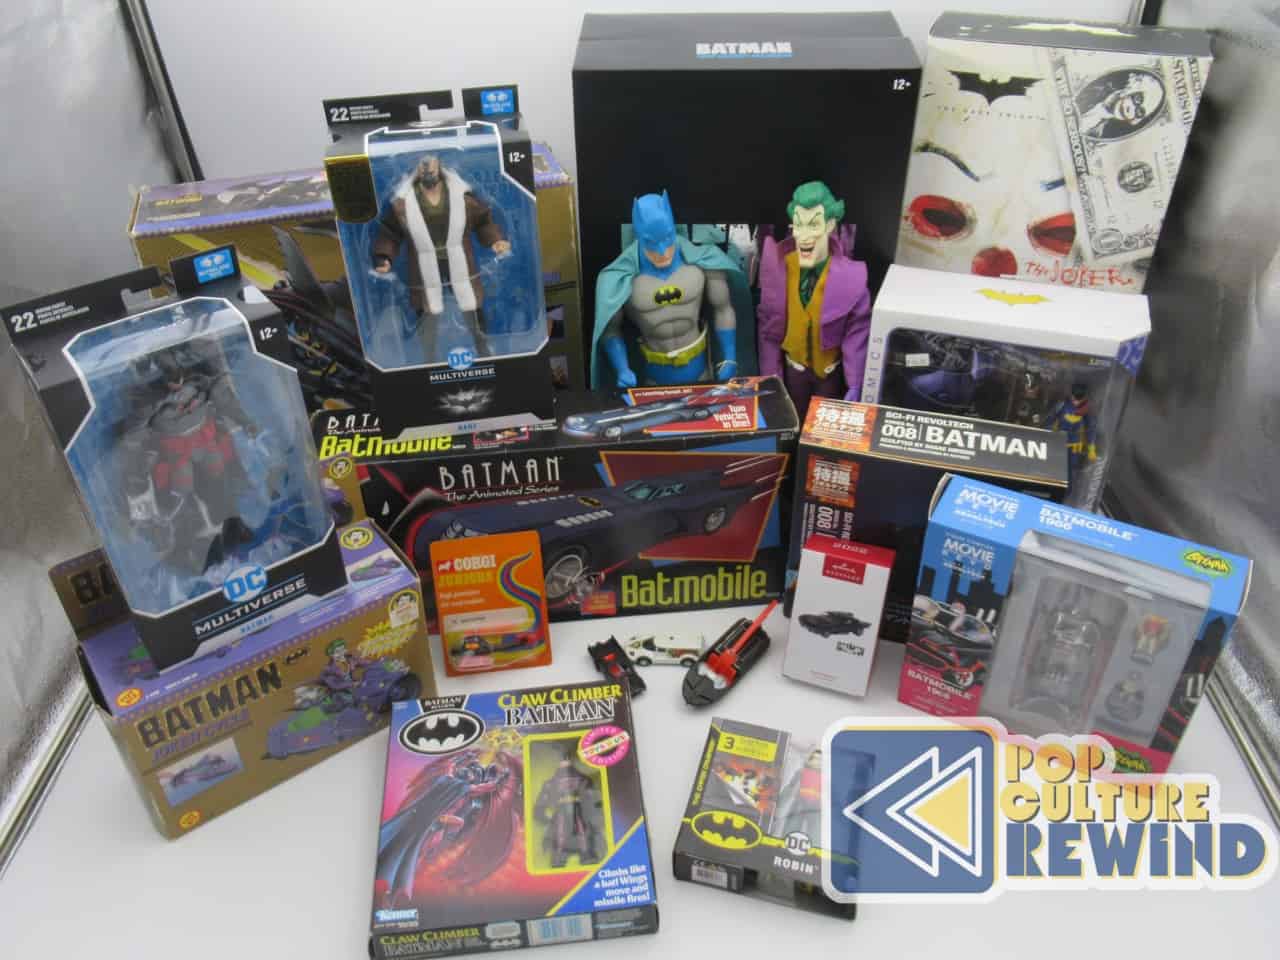 Batman Toys and collectibles at auction 12/16